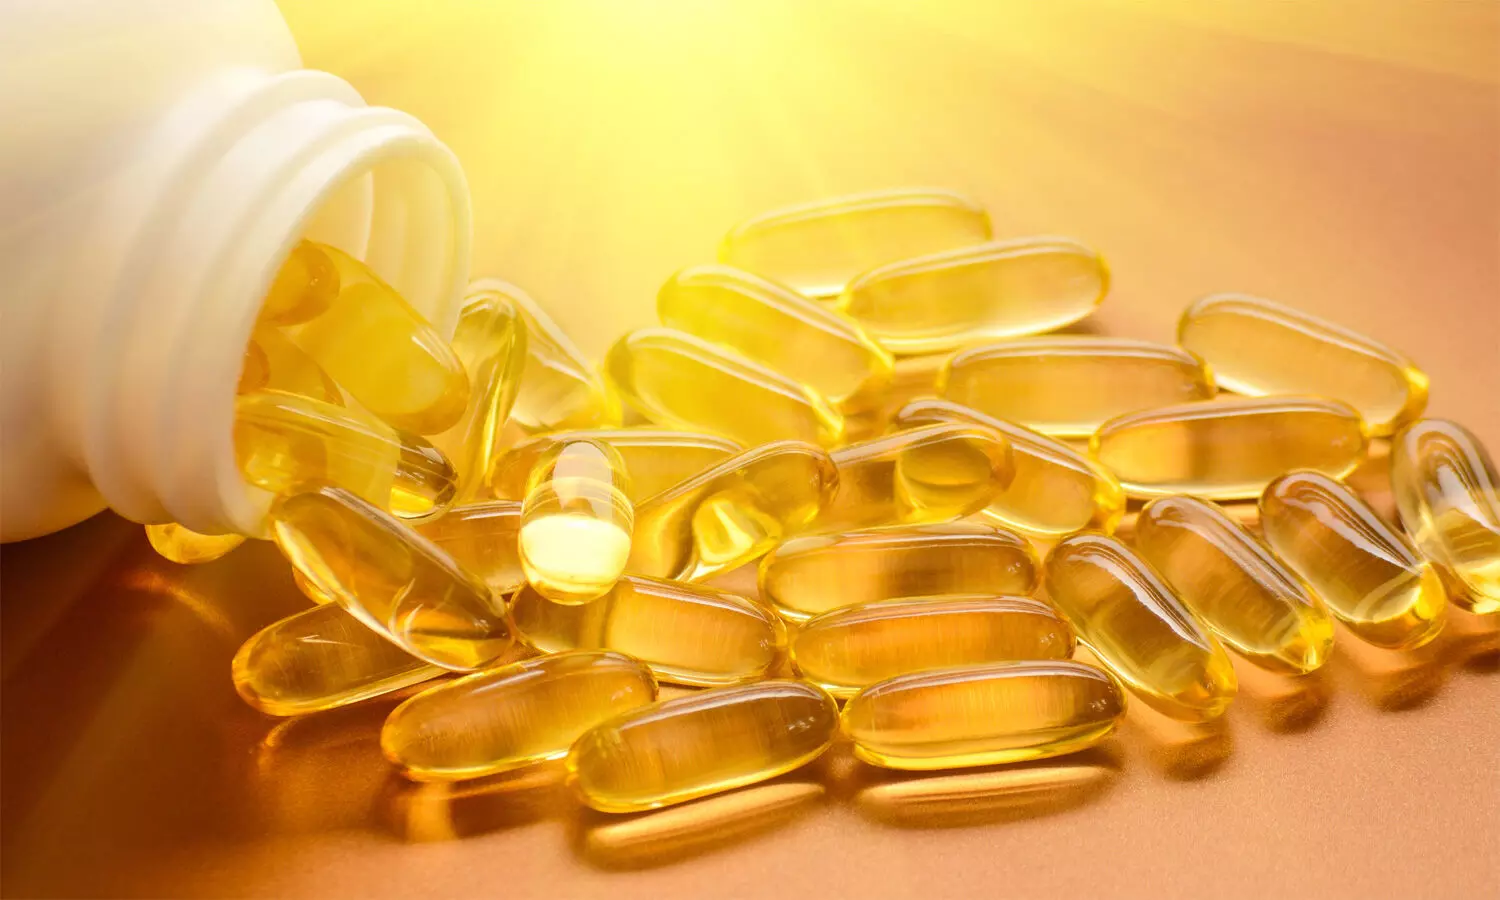 Vitamin D deficiency increases addictive behavior for opioid and UV rays: Study